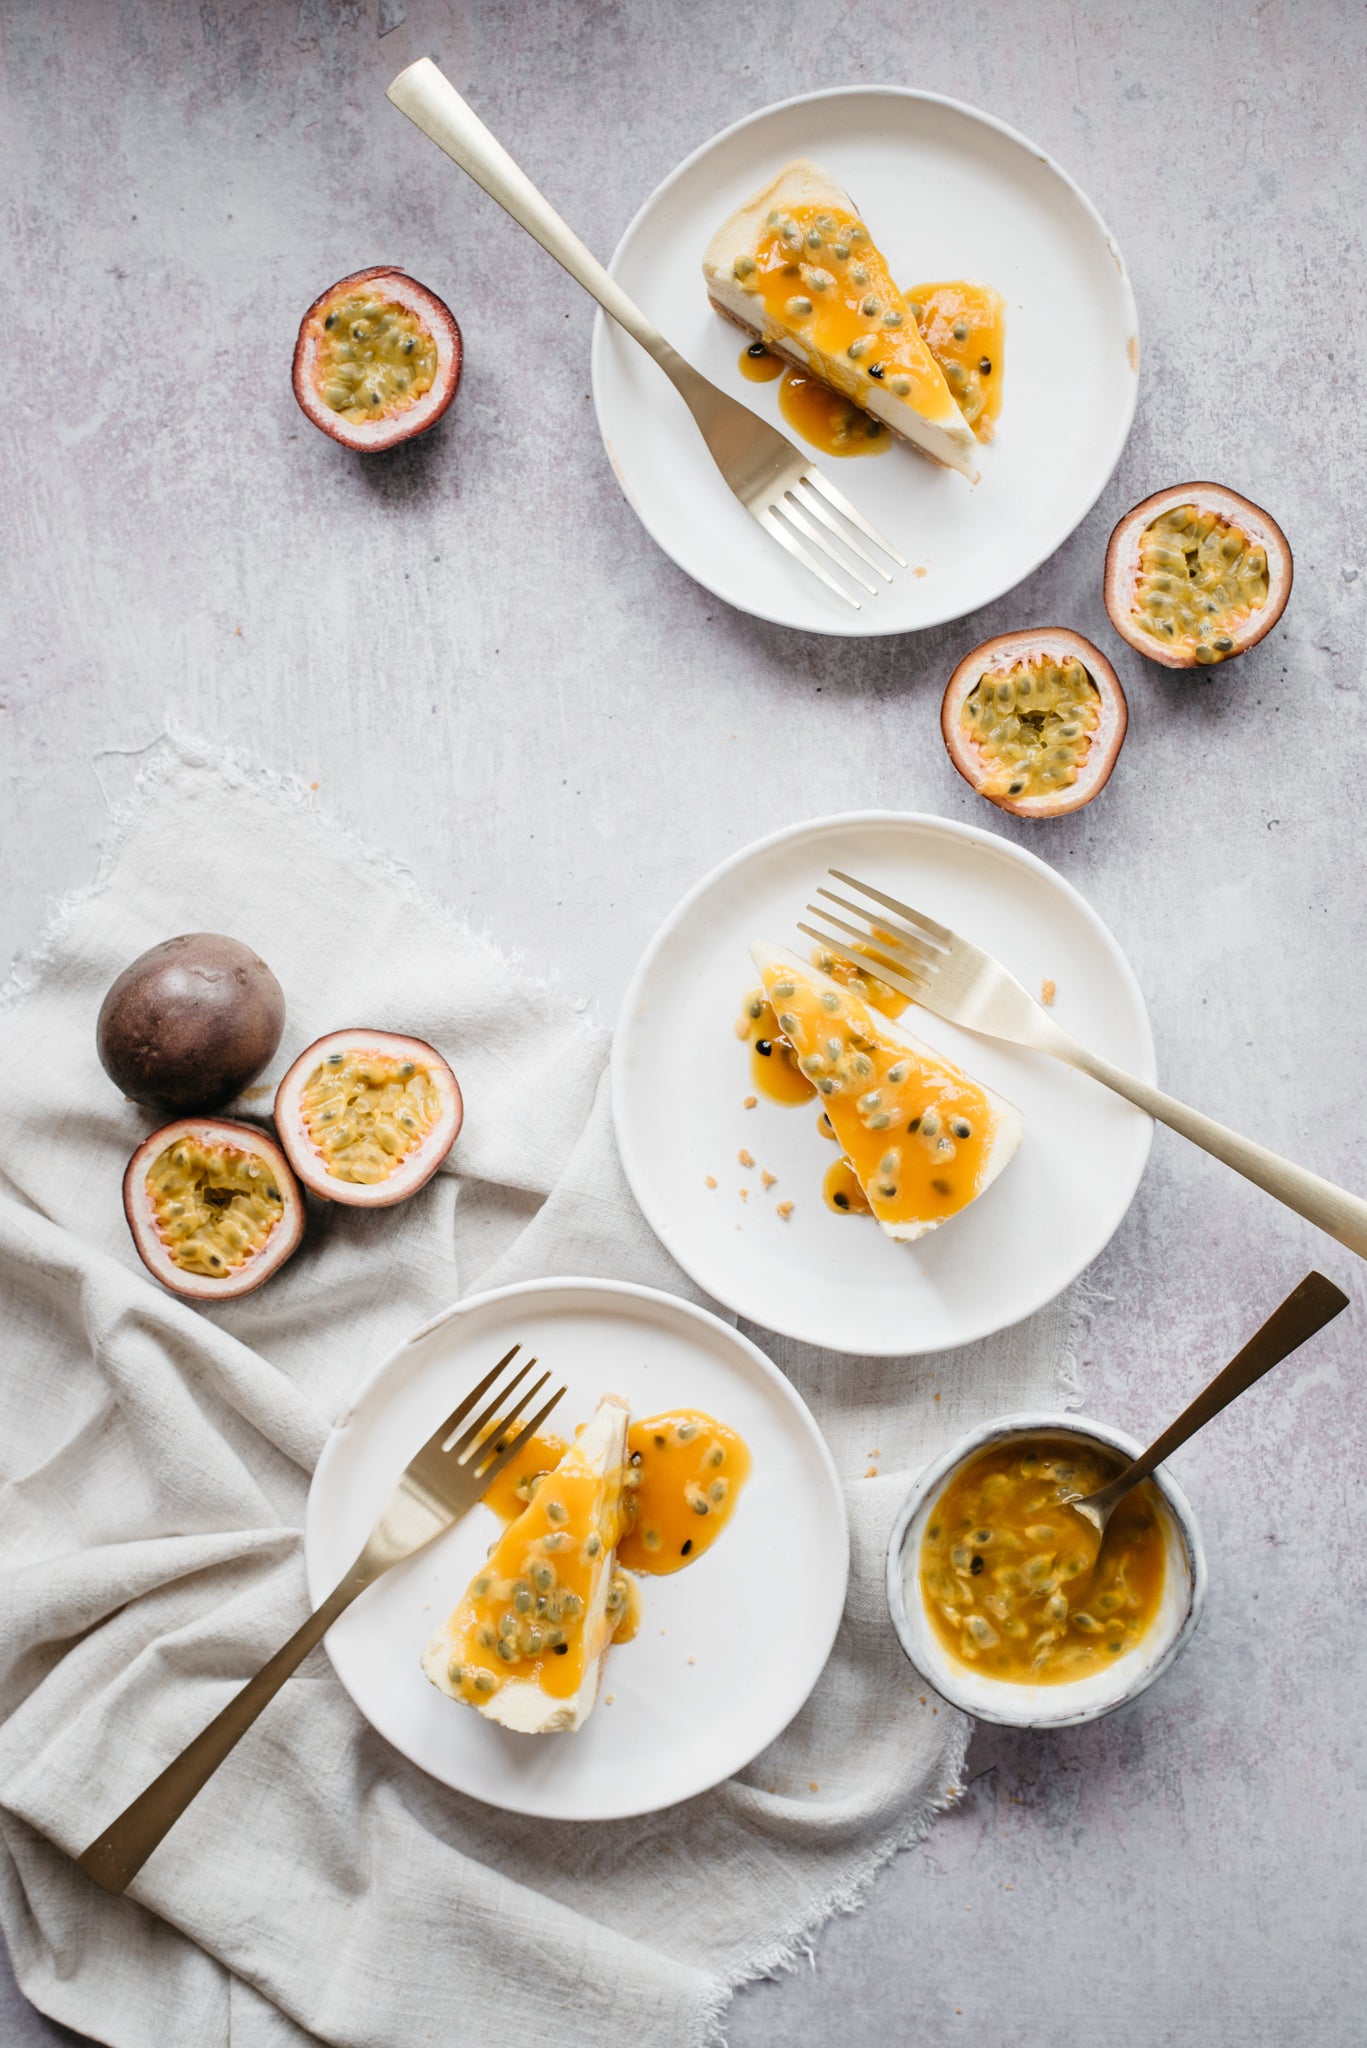 Overhead shot of 3 plates each with a slice of passionfruit cheesecake and a fork. 3 passionfruits beside the plate and a bowl of passion fruit sauce